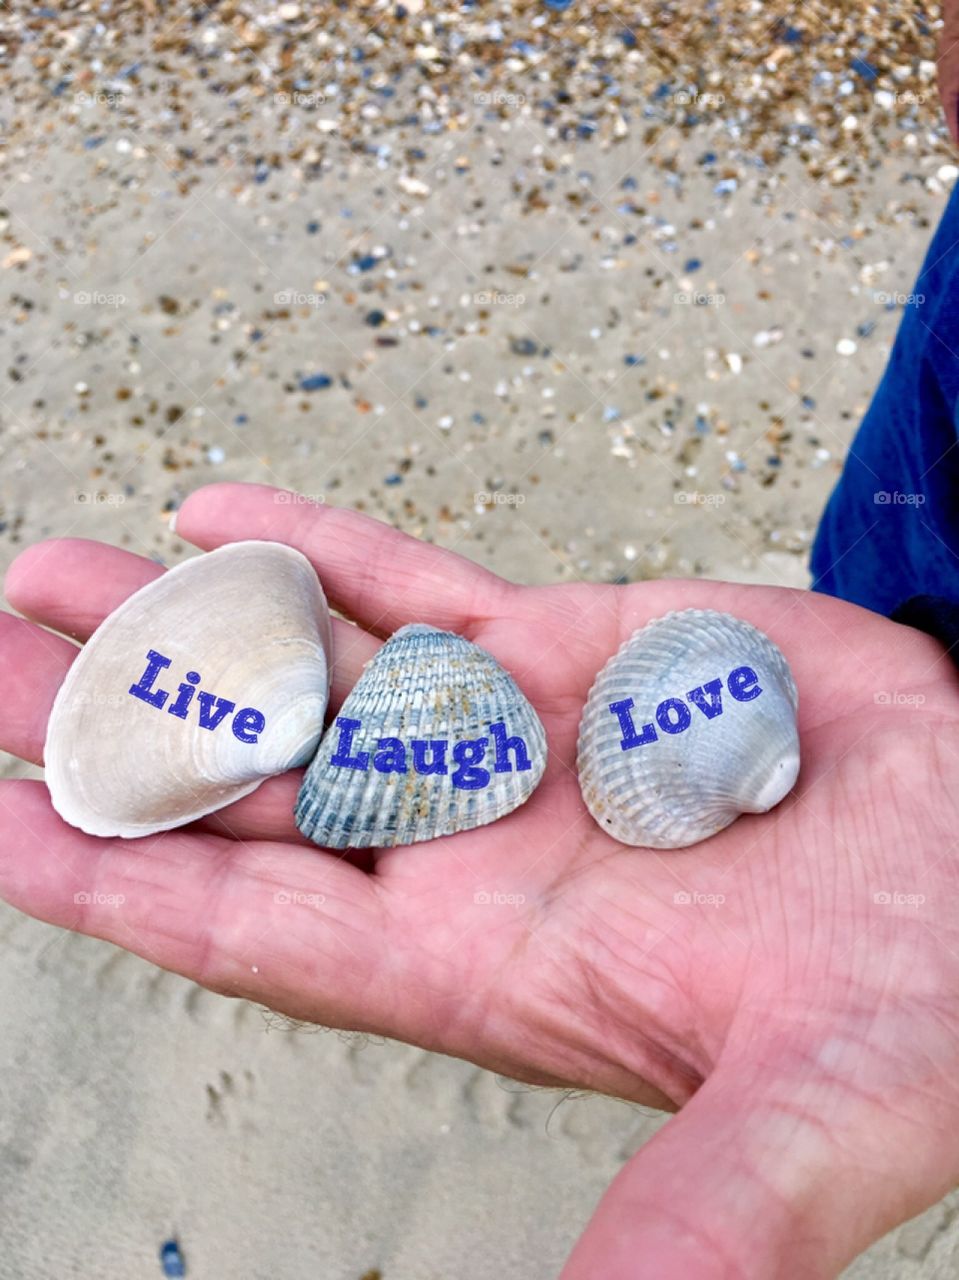 Collecting seashells along the beach.  Live Laugh Love